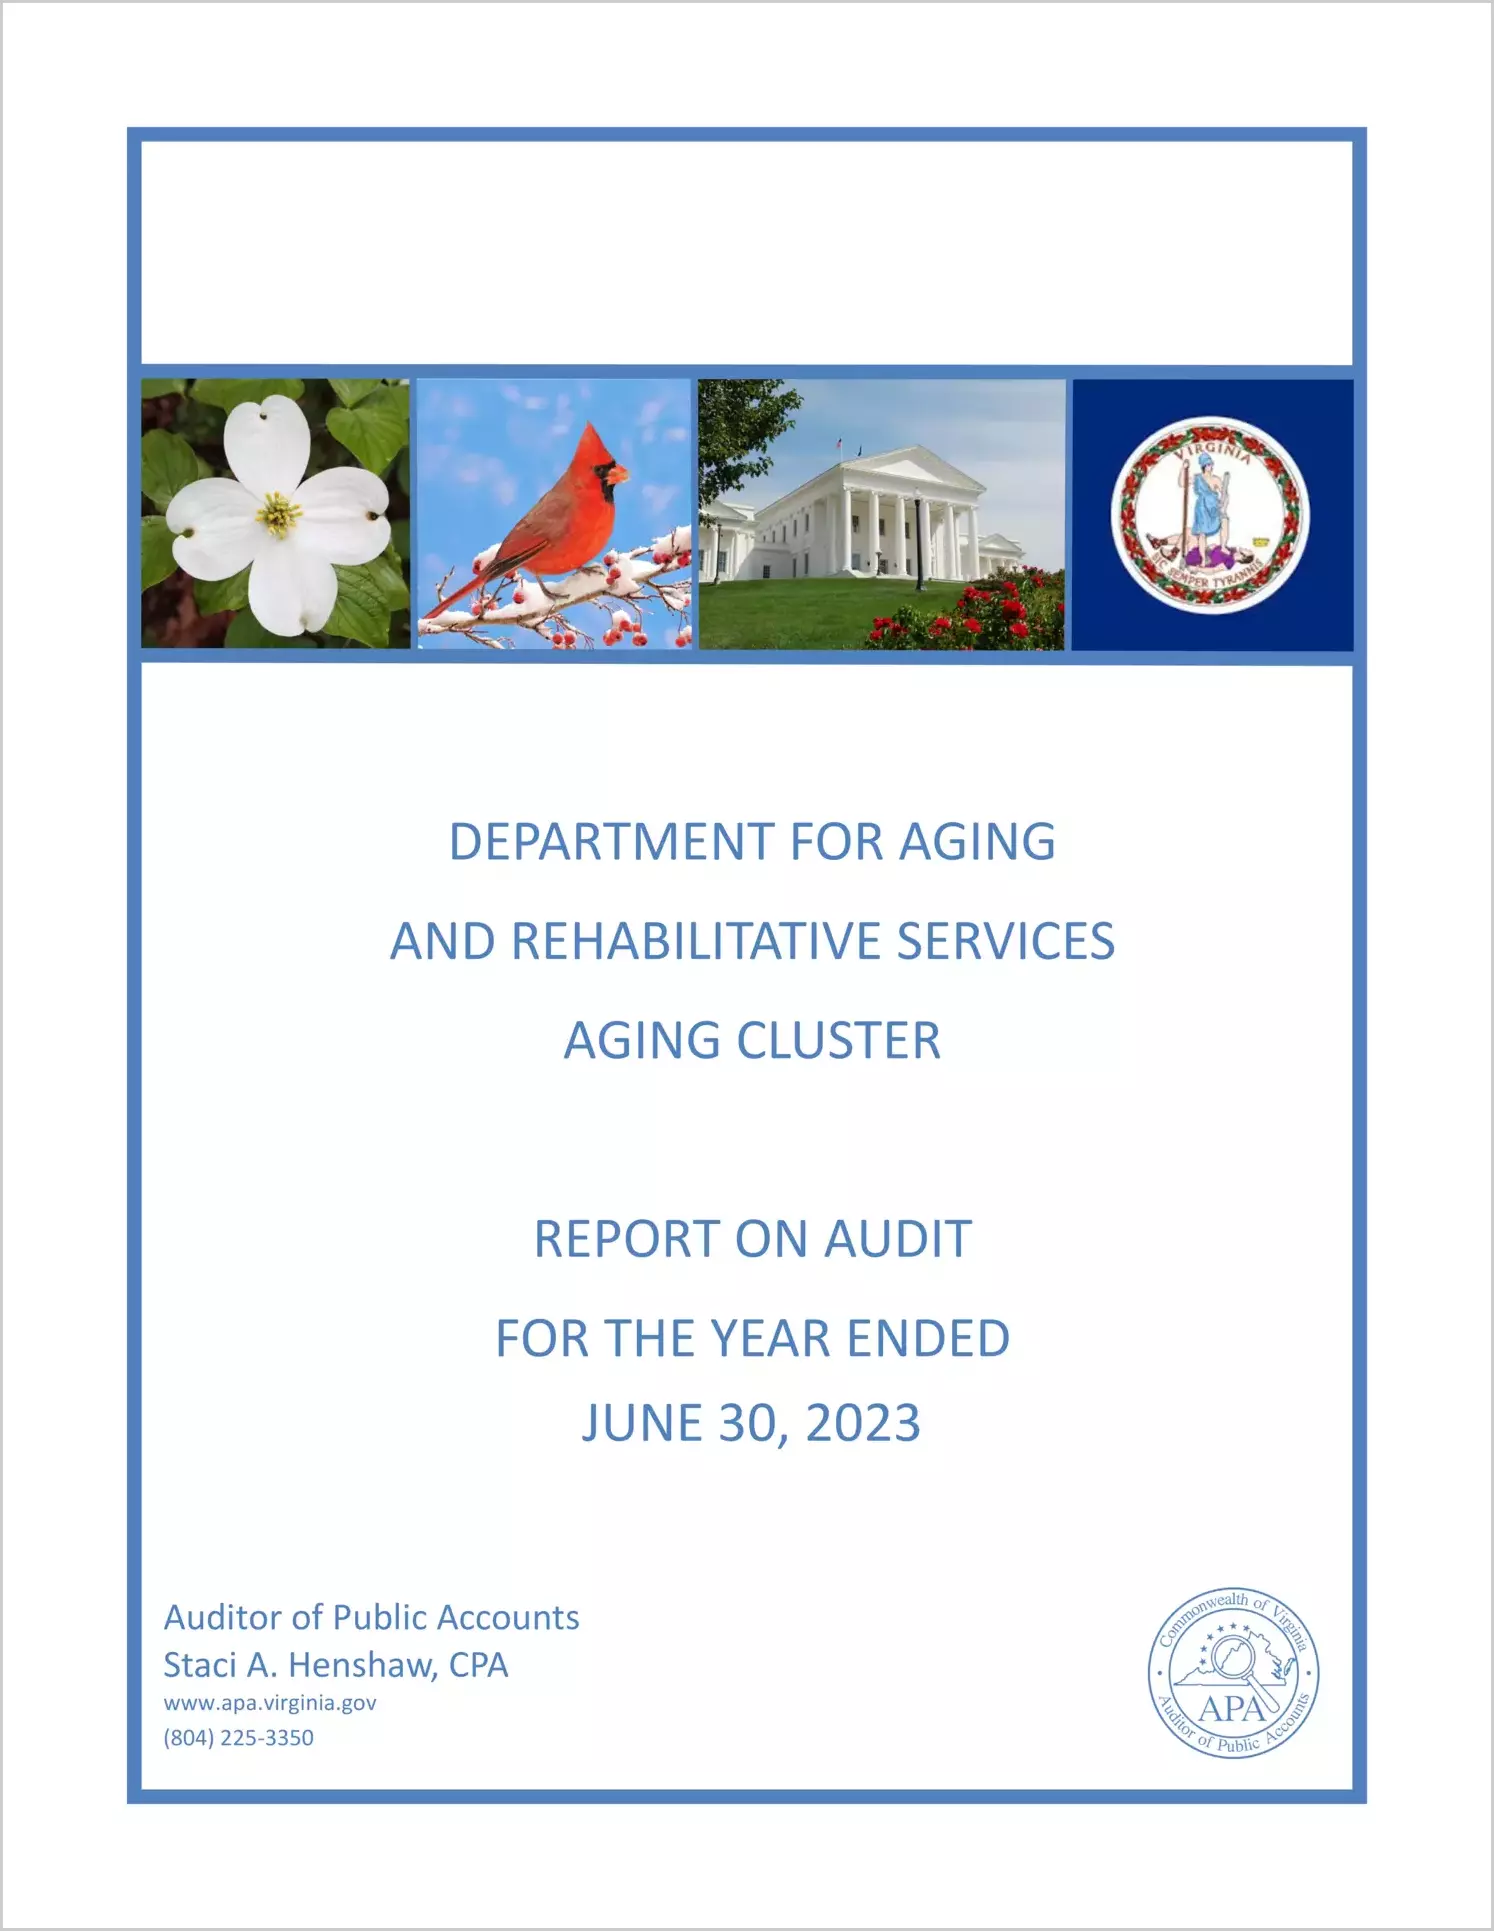 Department of Aging and Rehabilitative Services Aging Cluster for the year ended June 30, 2023